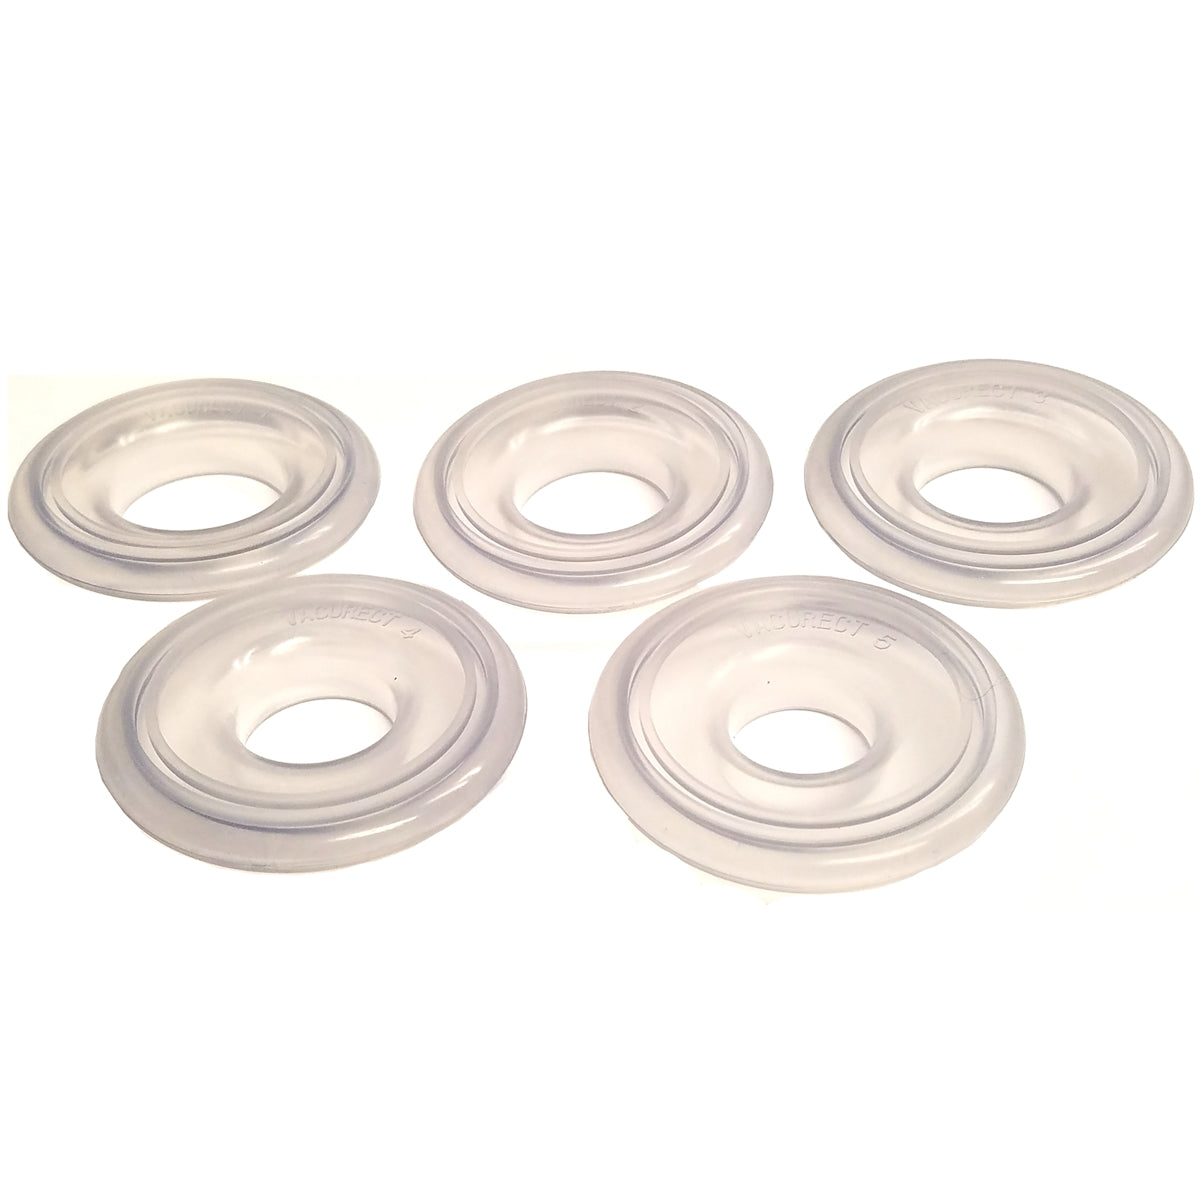 Vacurect Tension Ring Set (5 Rings) HealthConnection – Health Connection